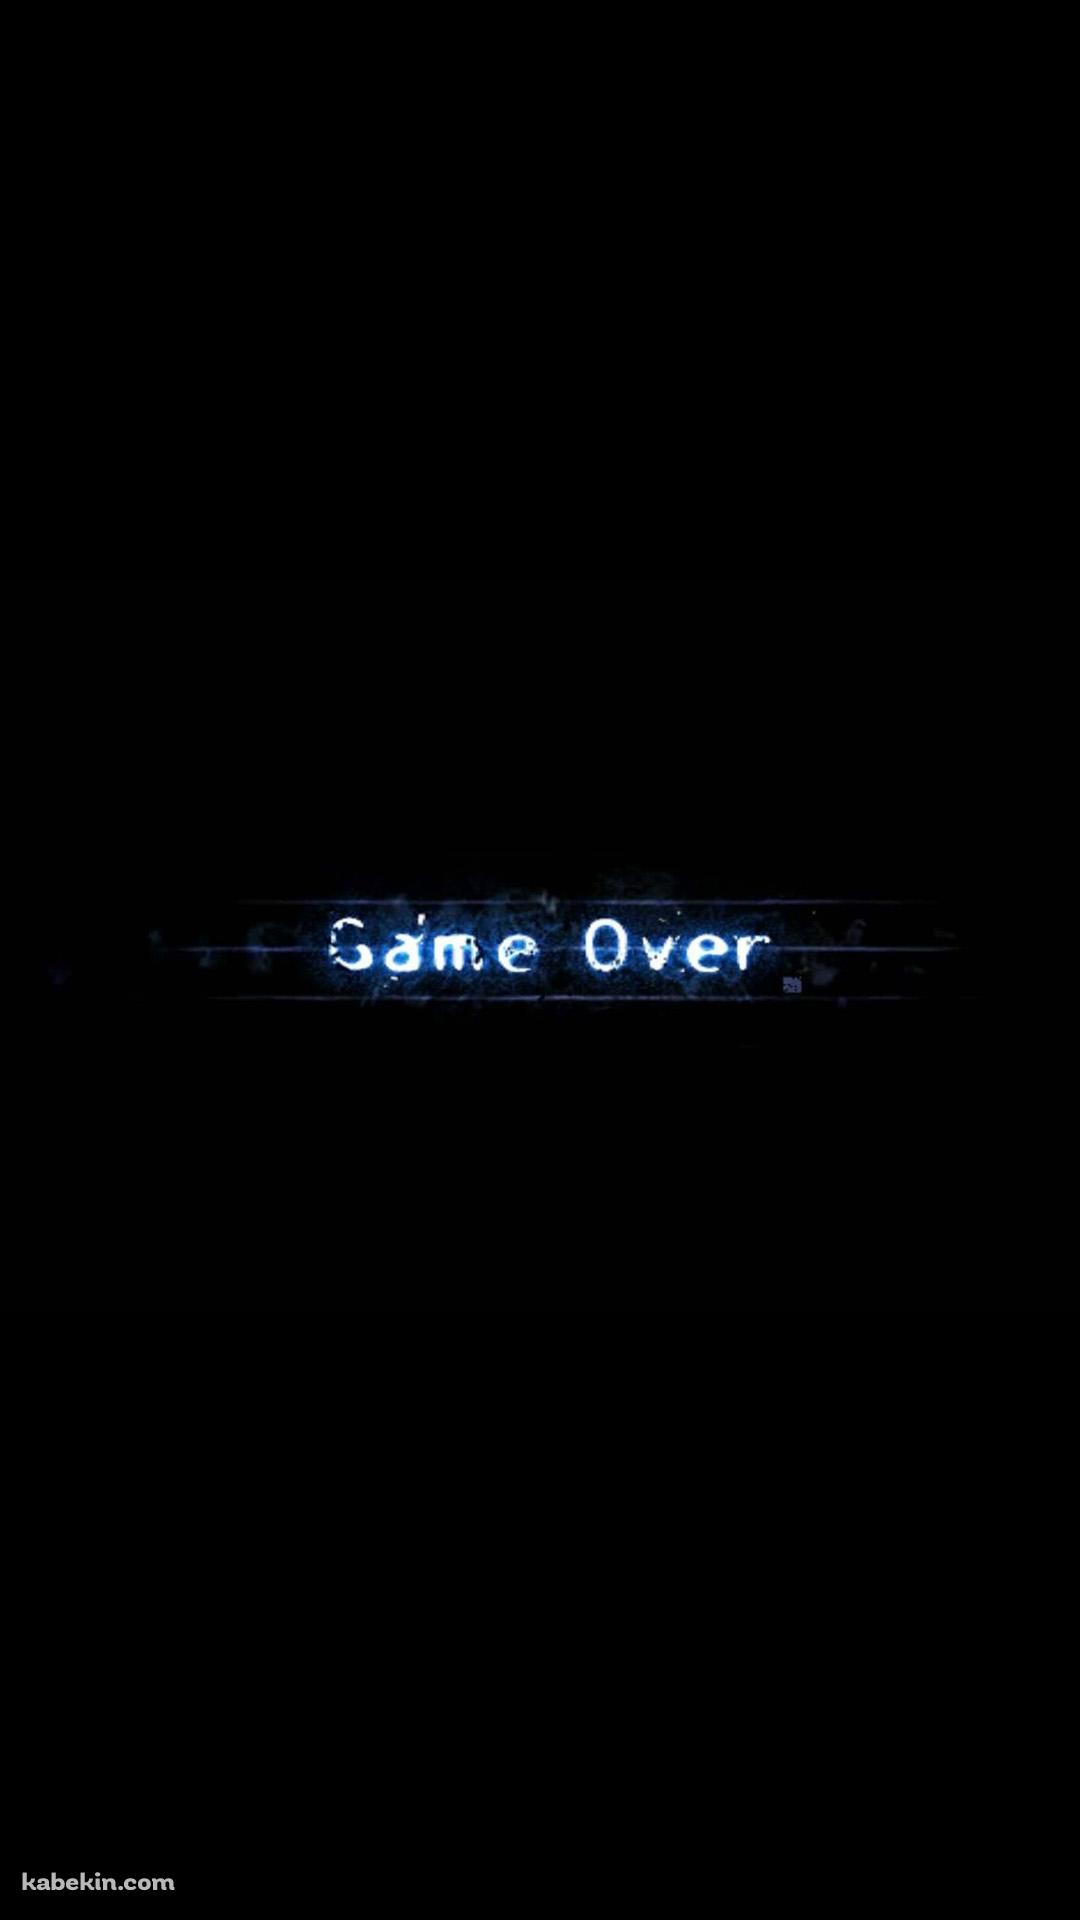 Game Over ゲームオーバーのandroid壁紙 1080 X 1920 壁紙